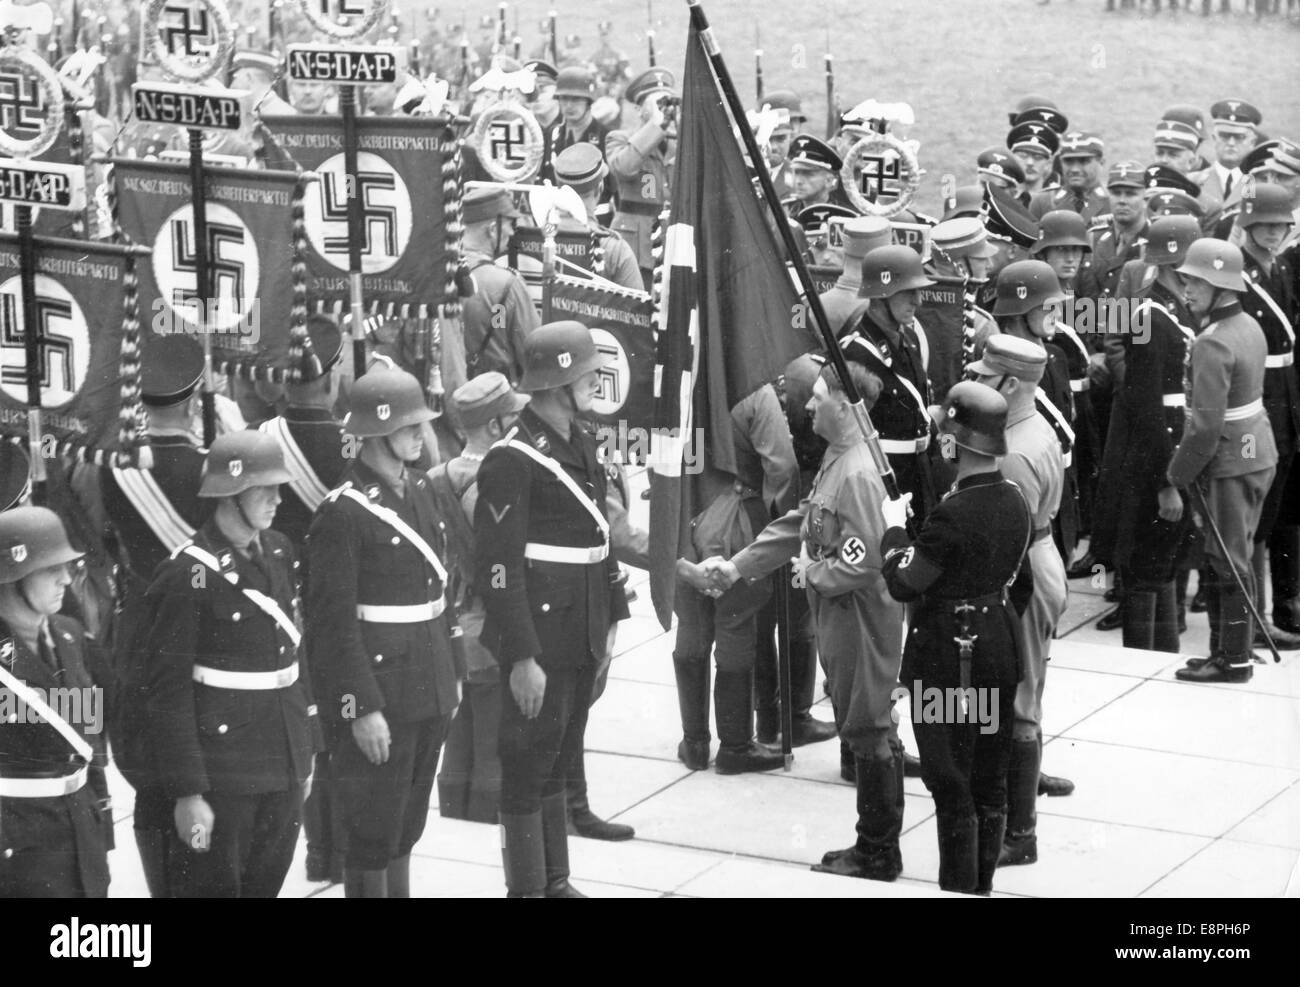 Nuremberg Rally 1937 in Nuremberg, Germany - Consecration of new standards with the 'Blood Flag' by Adolf Hitler during the roll call of Sturmabteilung (SA), Schutzstaffel (SS), National Socialist Motor Corps (NSKK) and National Socialist Flyers Corps (NSFK) at Puitpoldarena at the Nazi party rally grounds. New standards of SA and SS were 'consecrated' by touching them to the 'Blood Flag', which supposedly was carried in the failed Beer Hall Putsch. (Flaws in quality due to the historic picture copy) Fotoarchiv für Zeitgeschichtee - NO WIRE SERVICE - Stock Photo